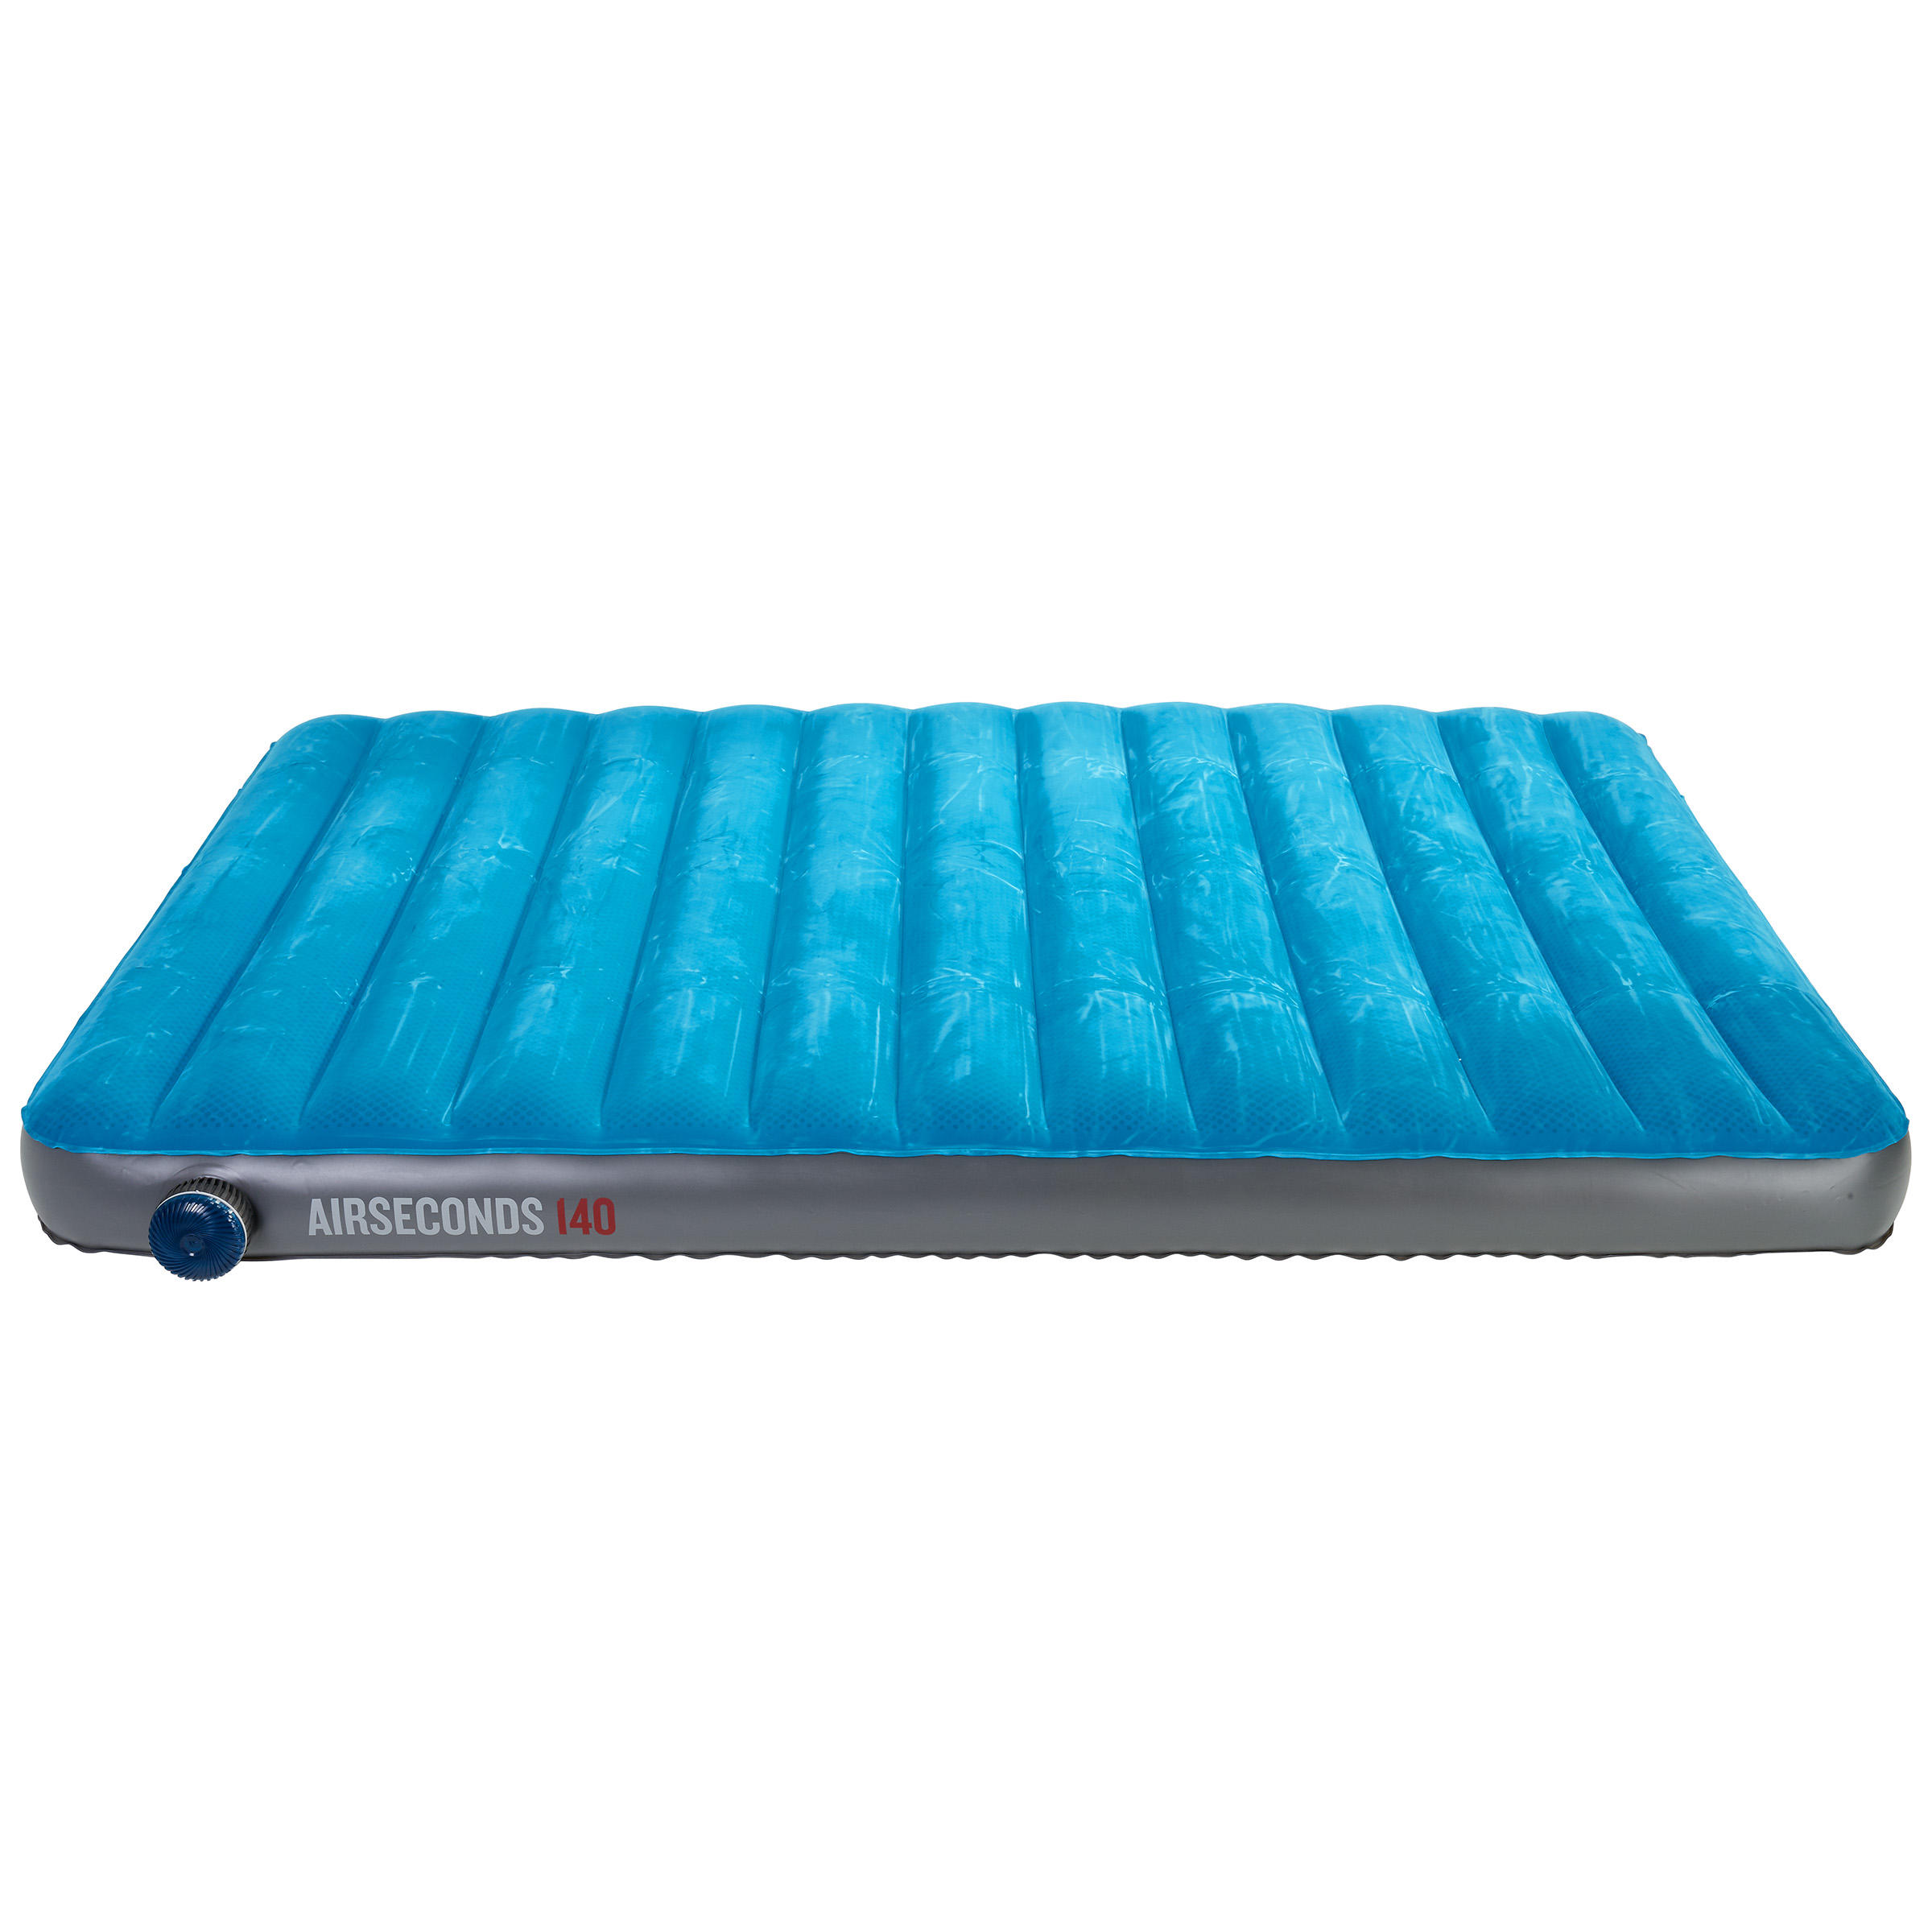 Air Seconds 2 Person Inflatable Mattress 4/11